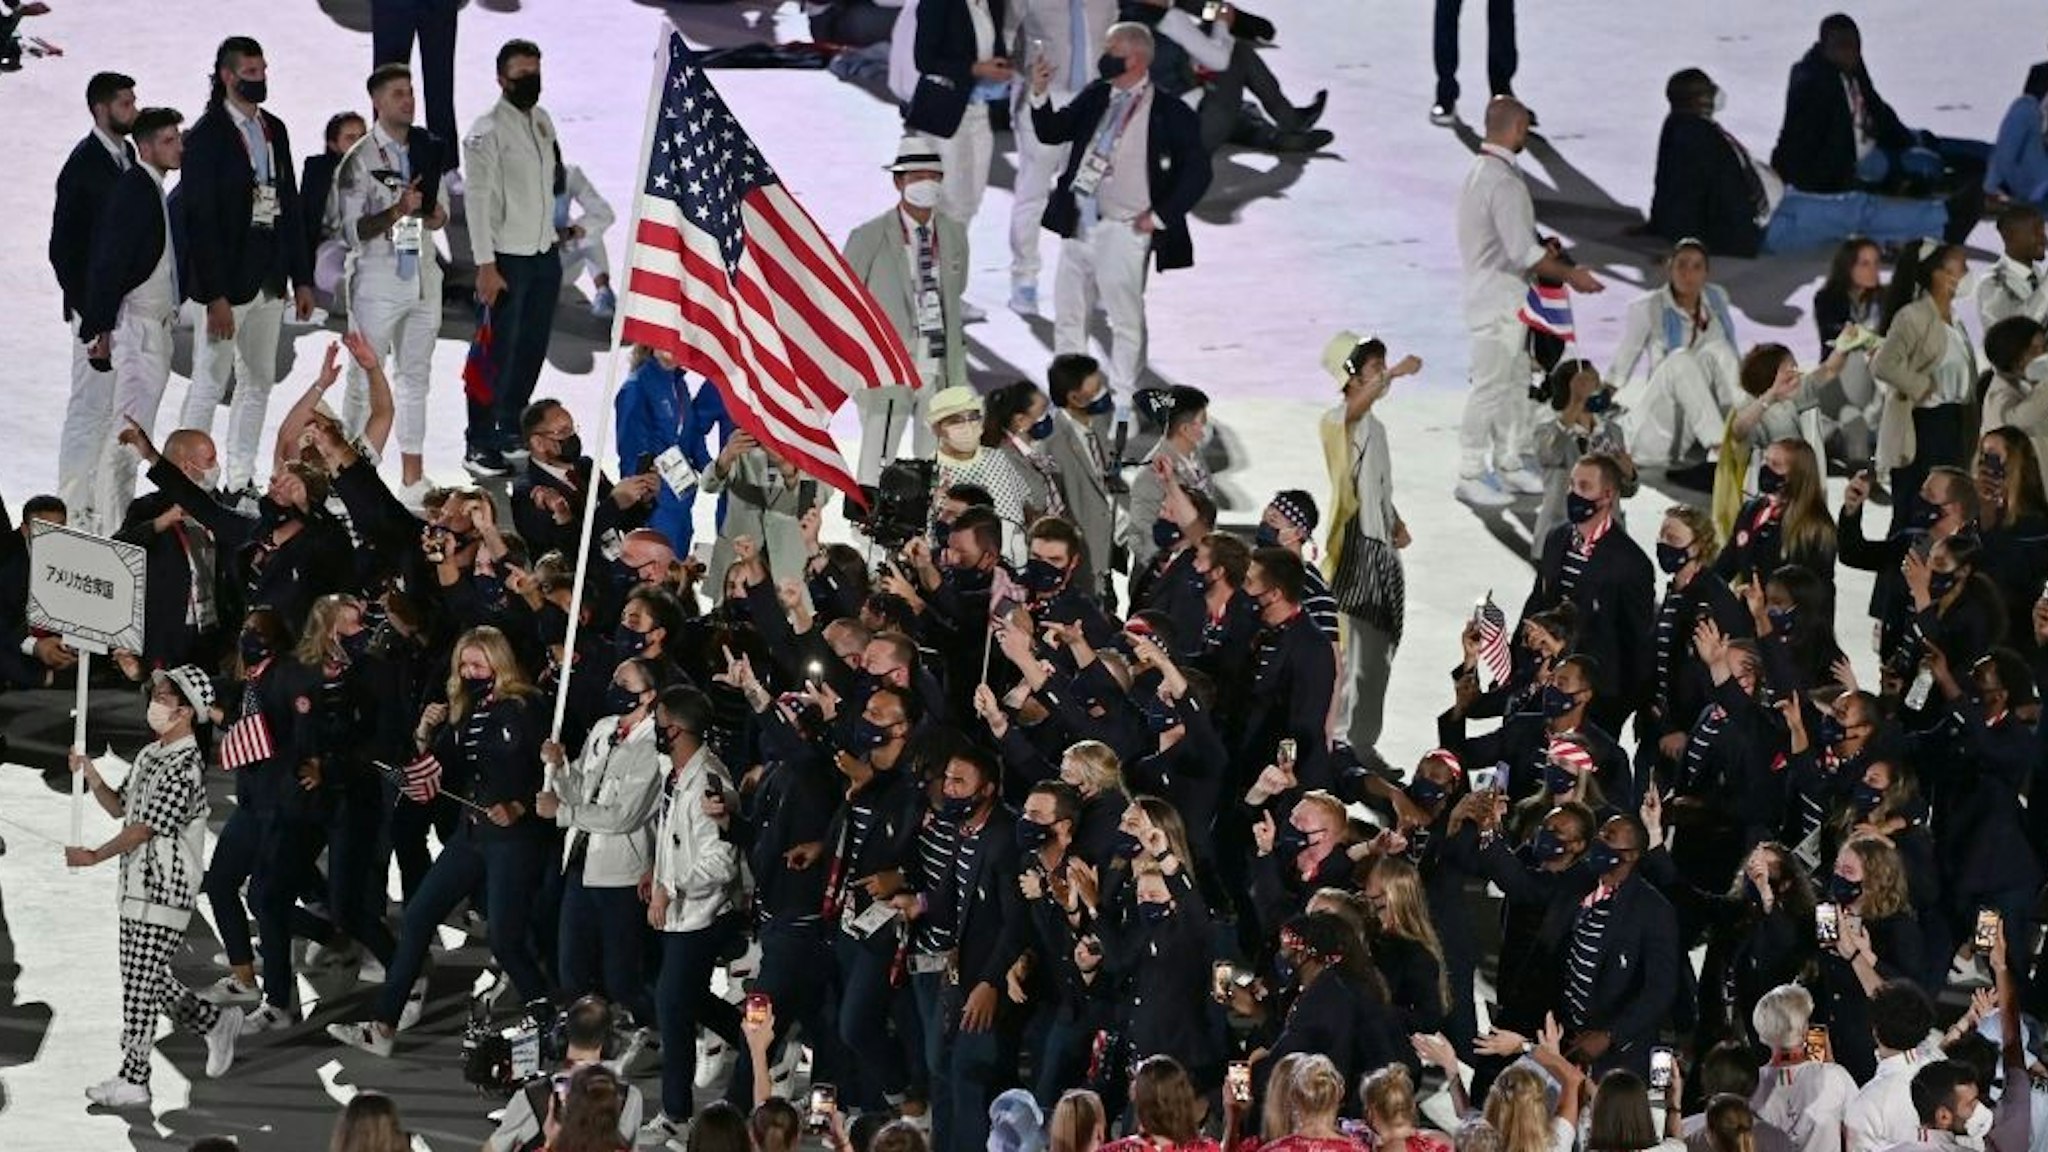 USA's delegation enters the Olympic Stadium during the opening ceremony of the Tokyo 2020 Olympic Games, in Tokyo, on July 23, 2021. (Photo by Jewel SAMAD / AFP) (Photo by